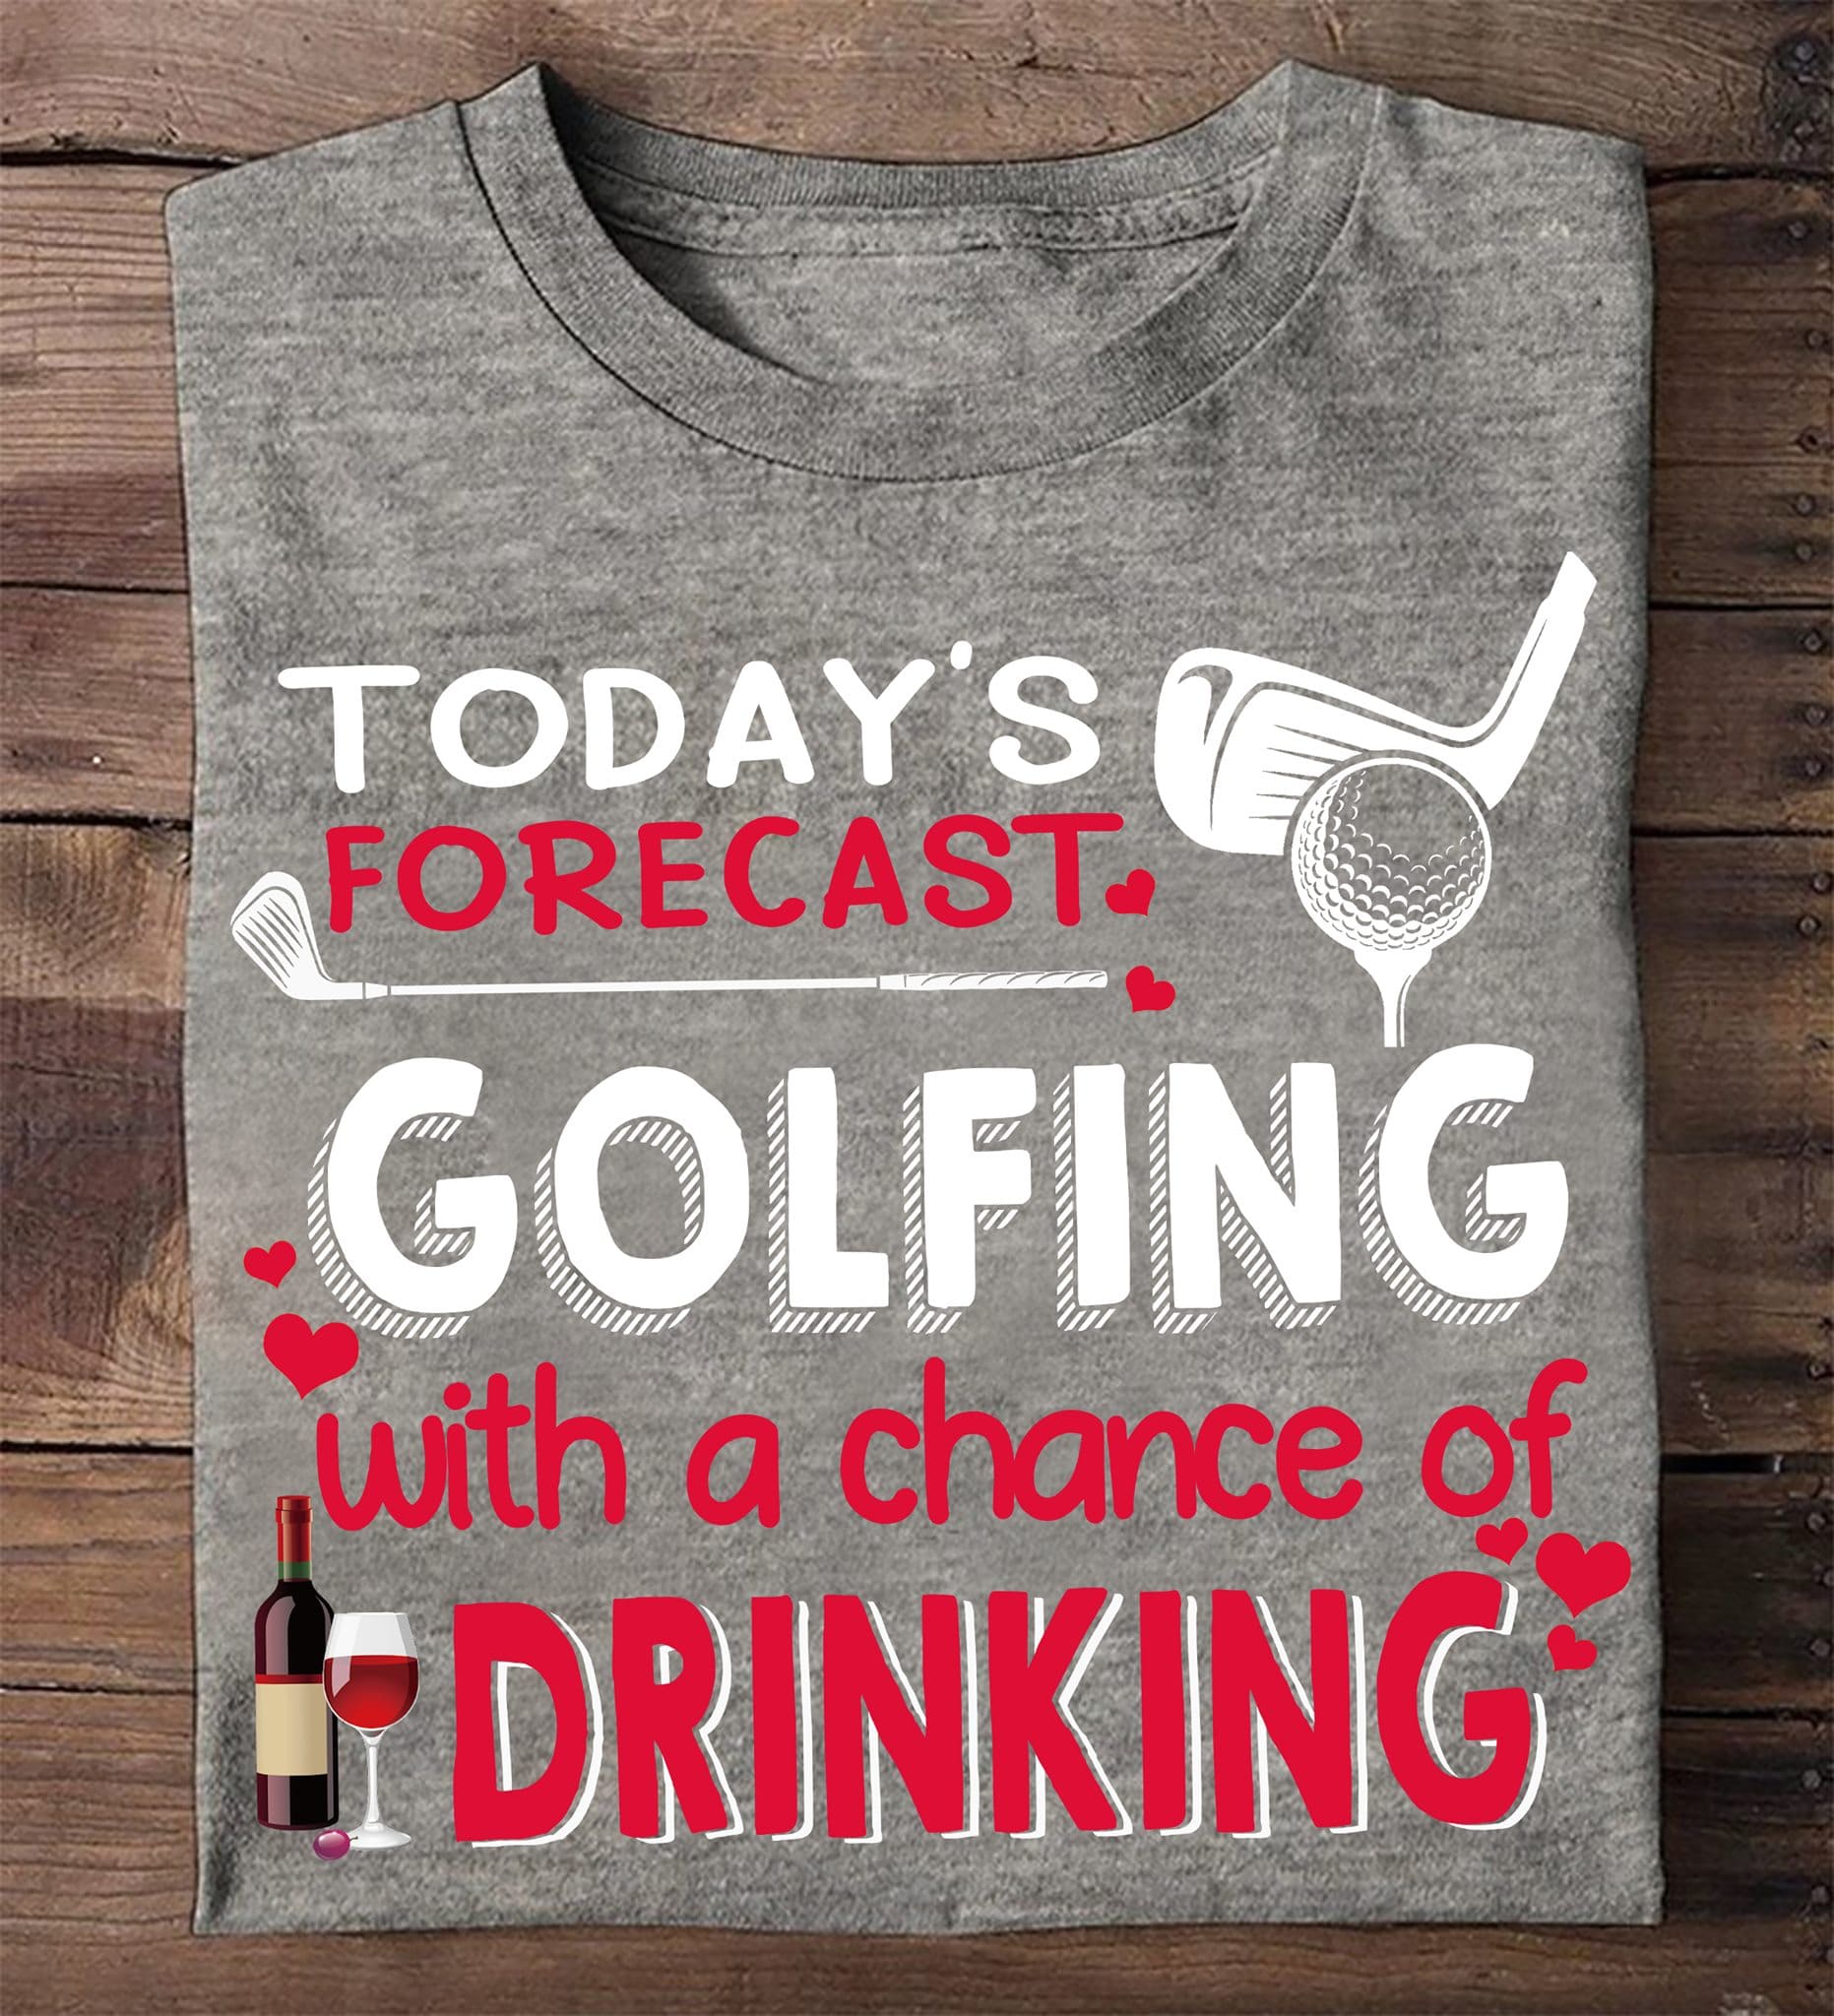 Today's forecast - Golfing with chance of drinking, Play golf drink wine